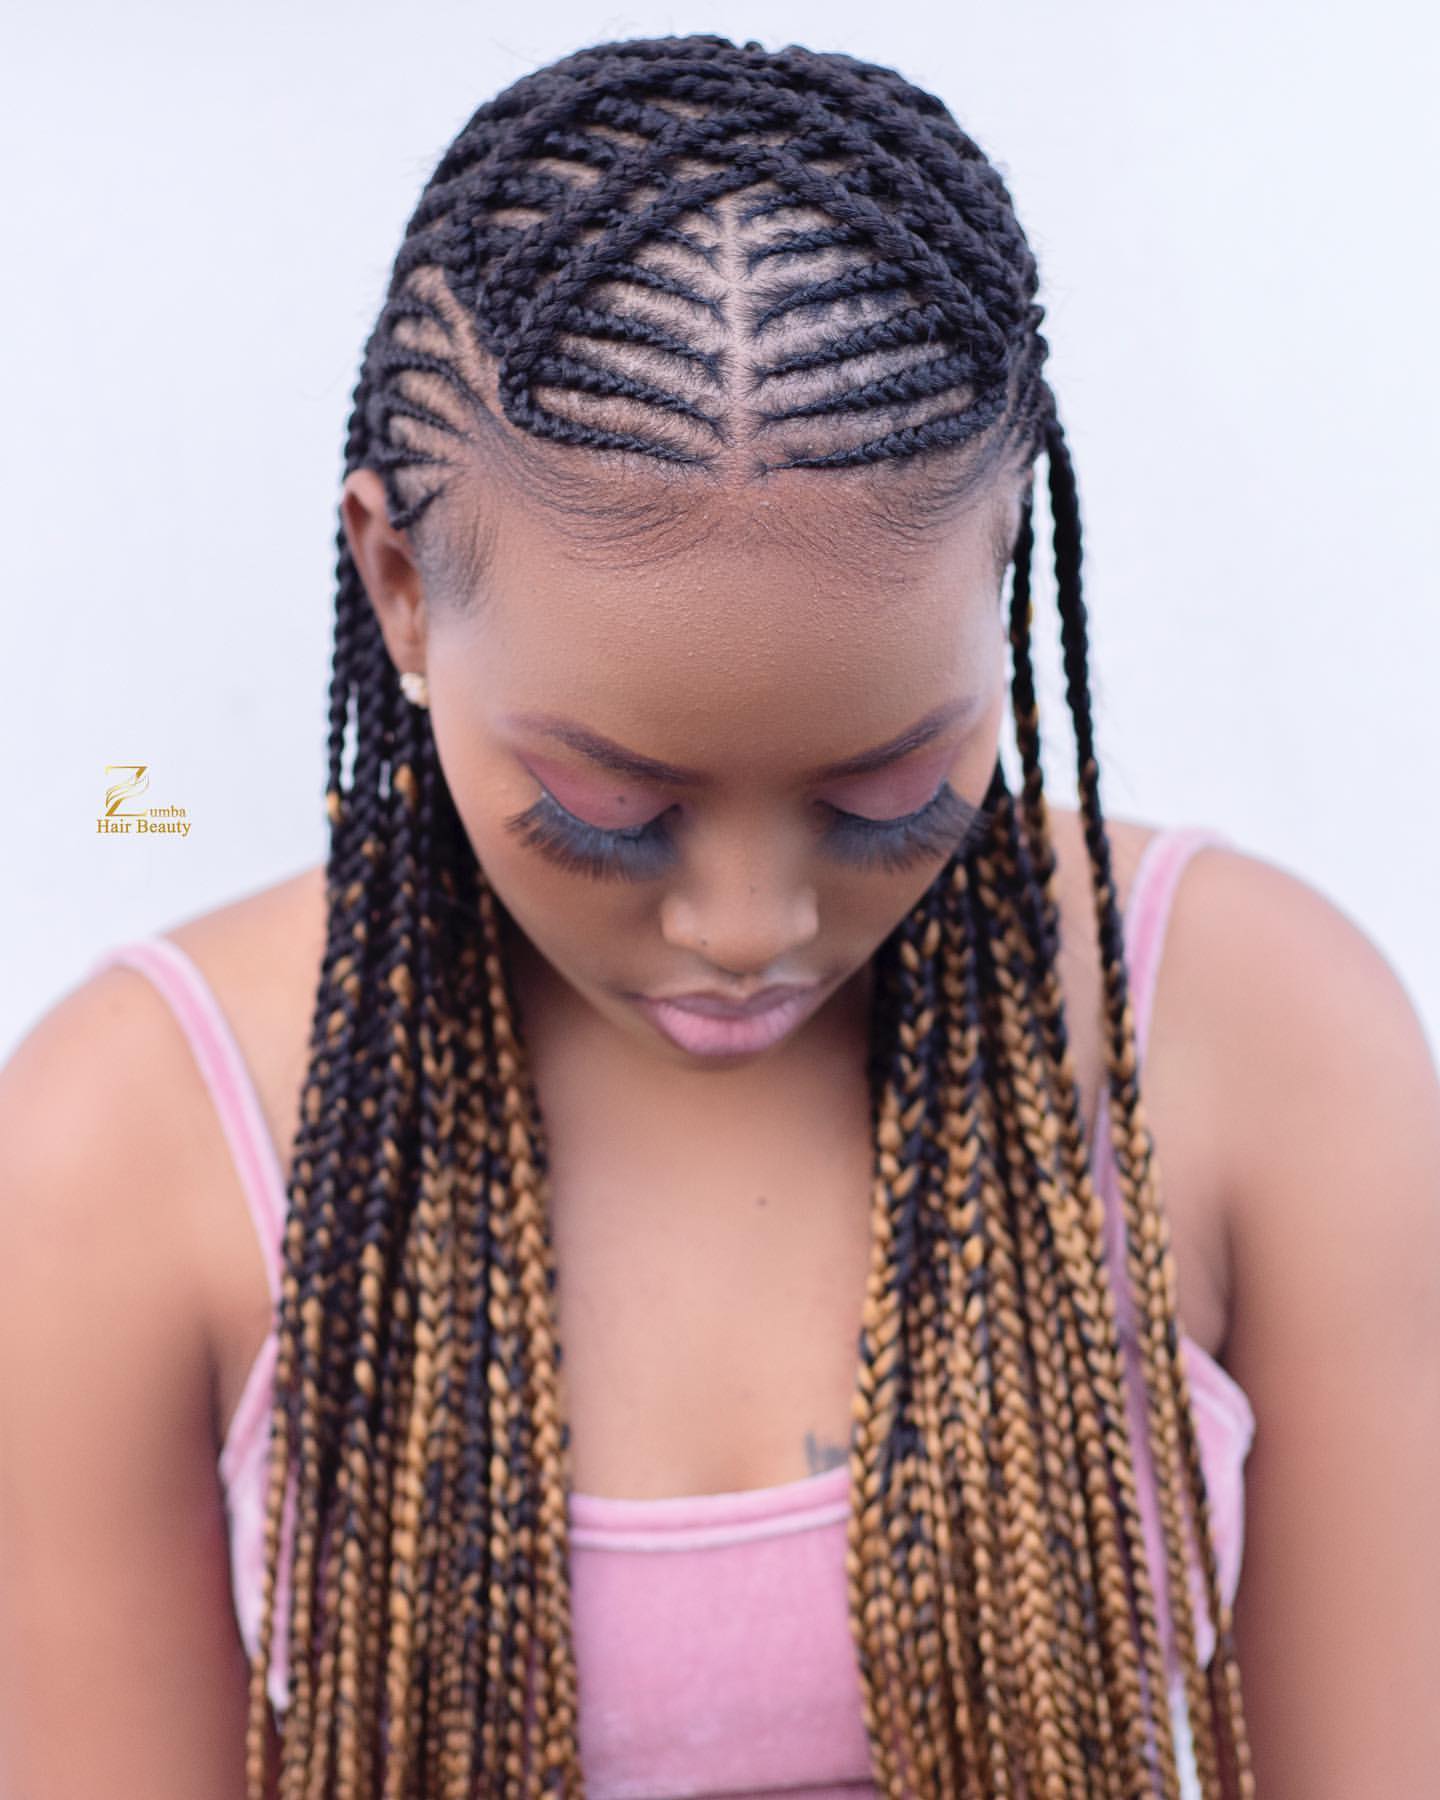 50+ Latest Hairstyles In Nigeria Pictures For Ladies